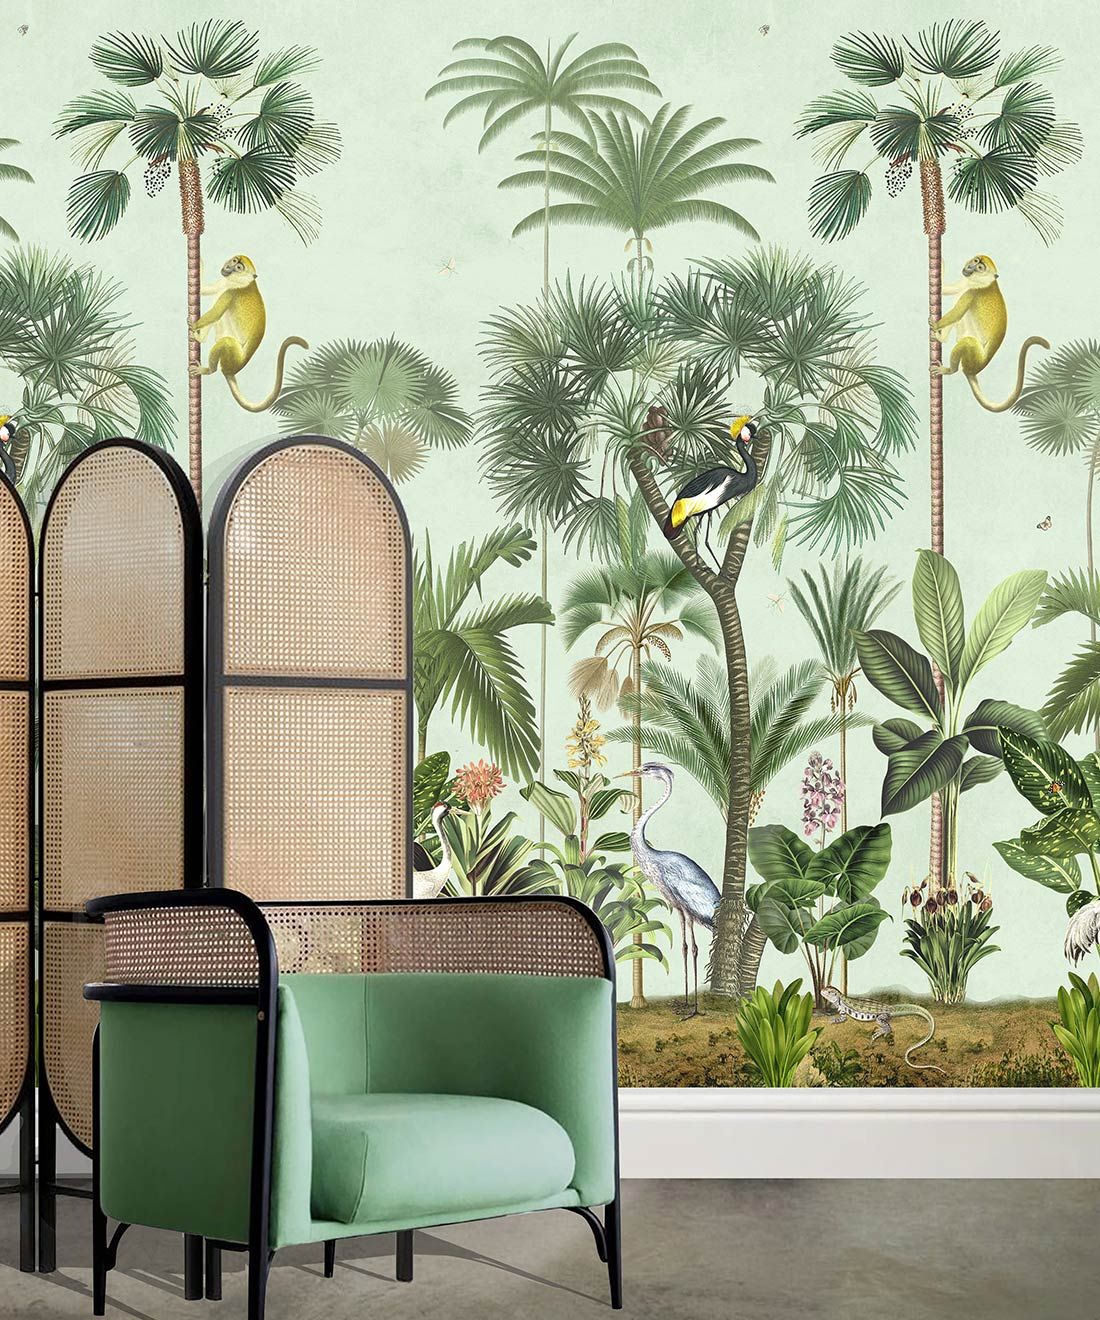 Indian Summer Wallpaper Mural •Bethany Linz • Palm Tree Mural • Blue • Insitu with chair